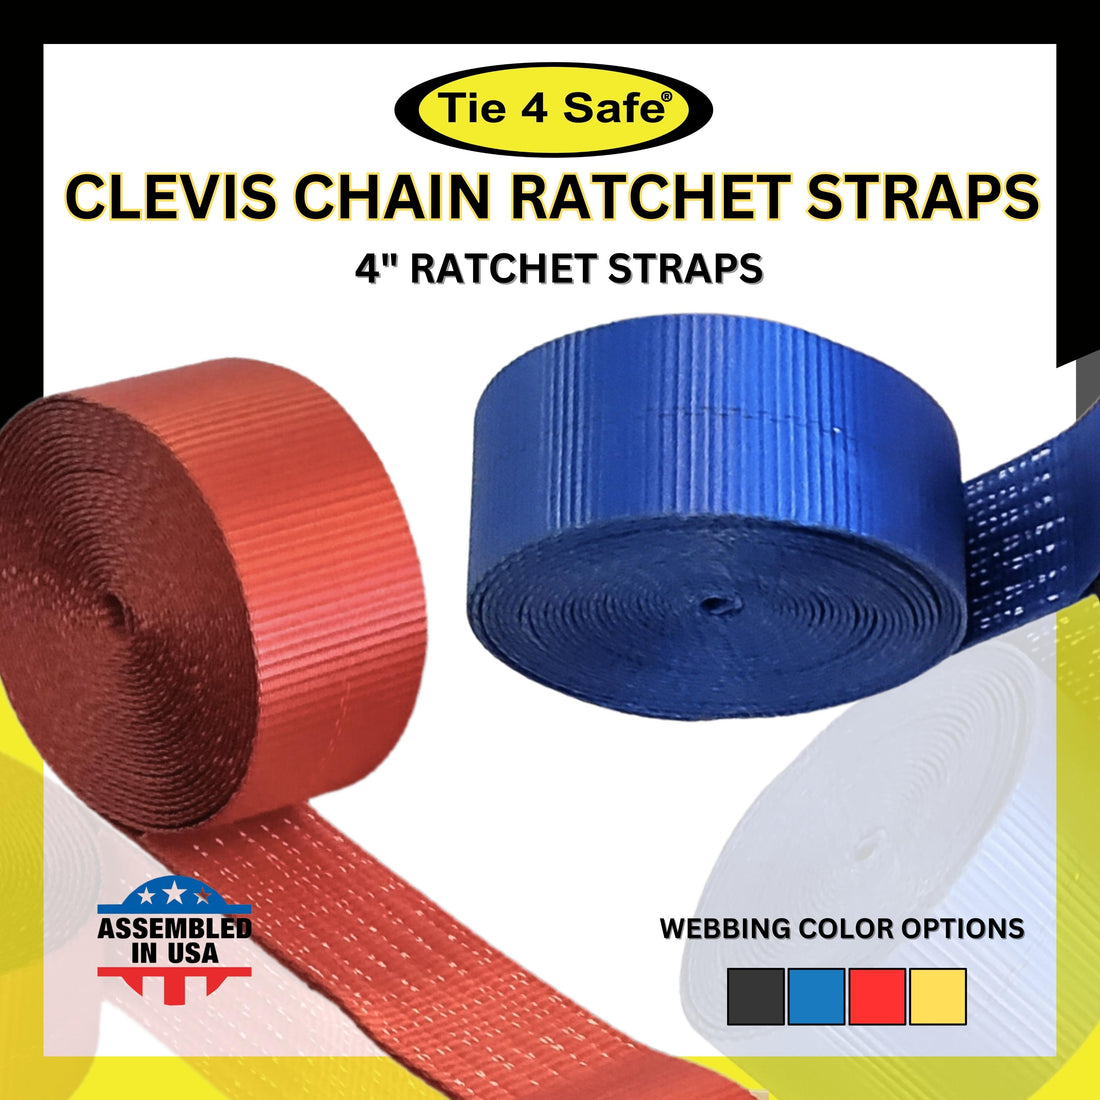 4" Ratchet Straps With Chain Extensions